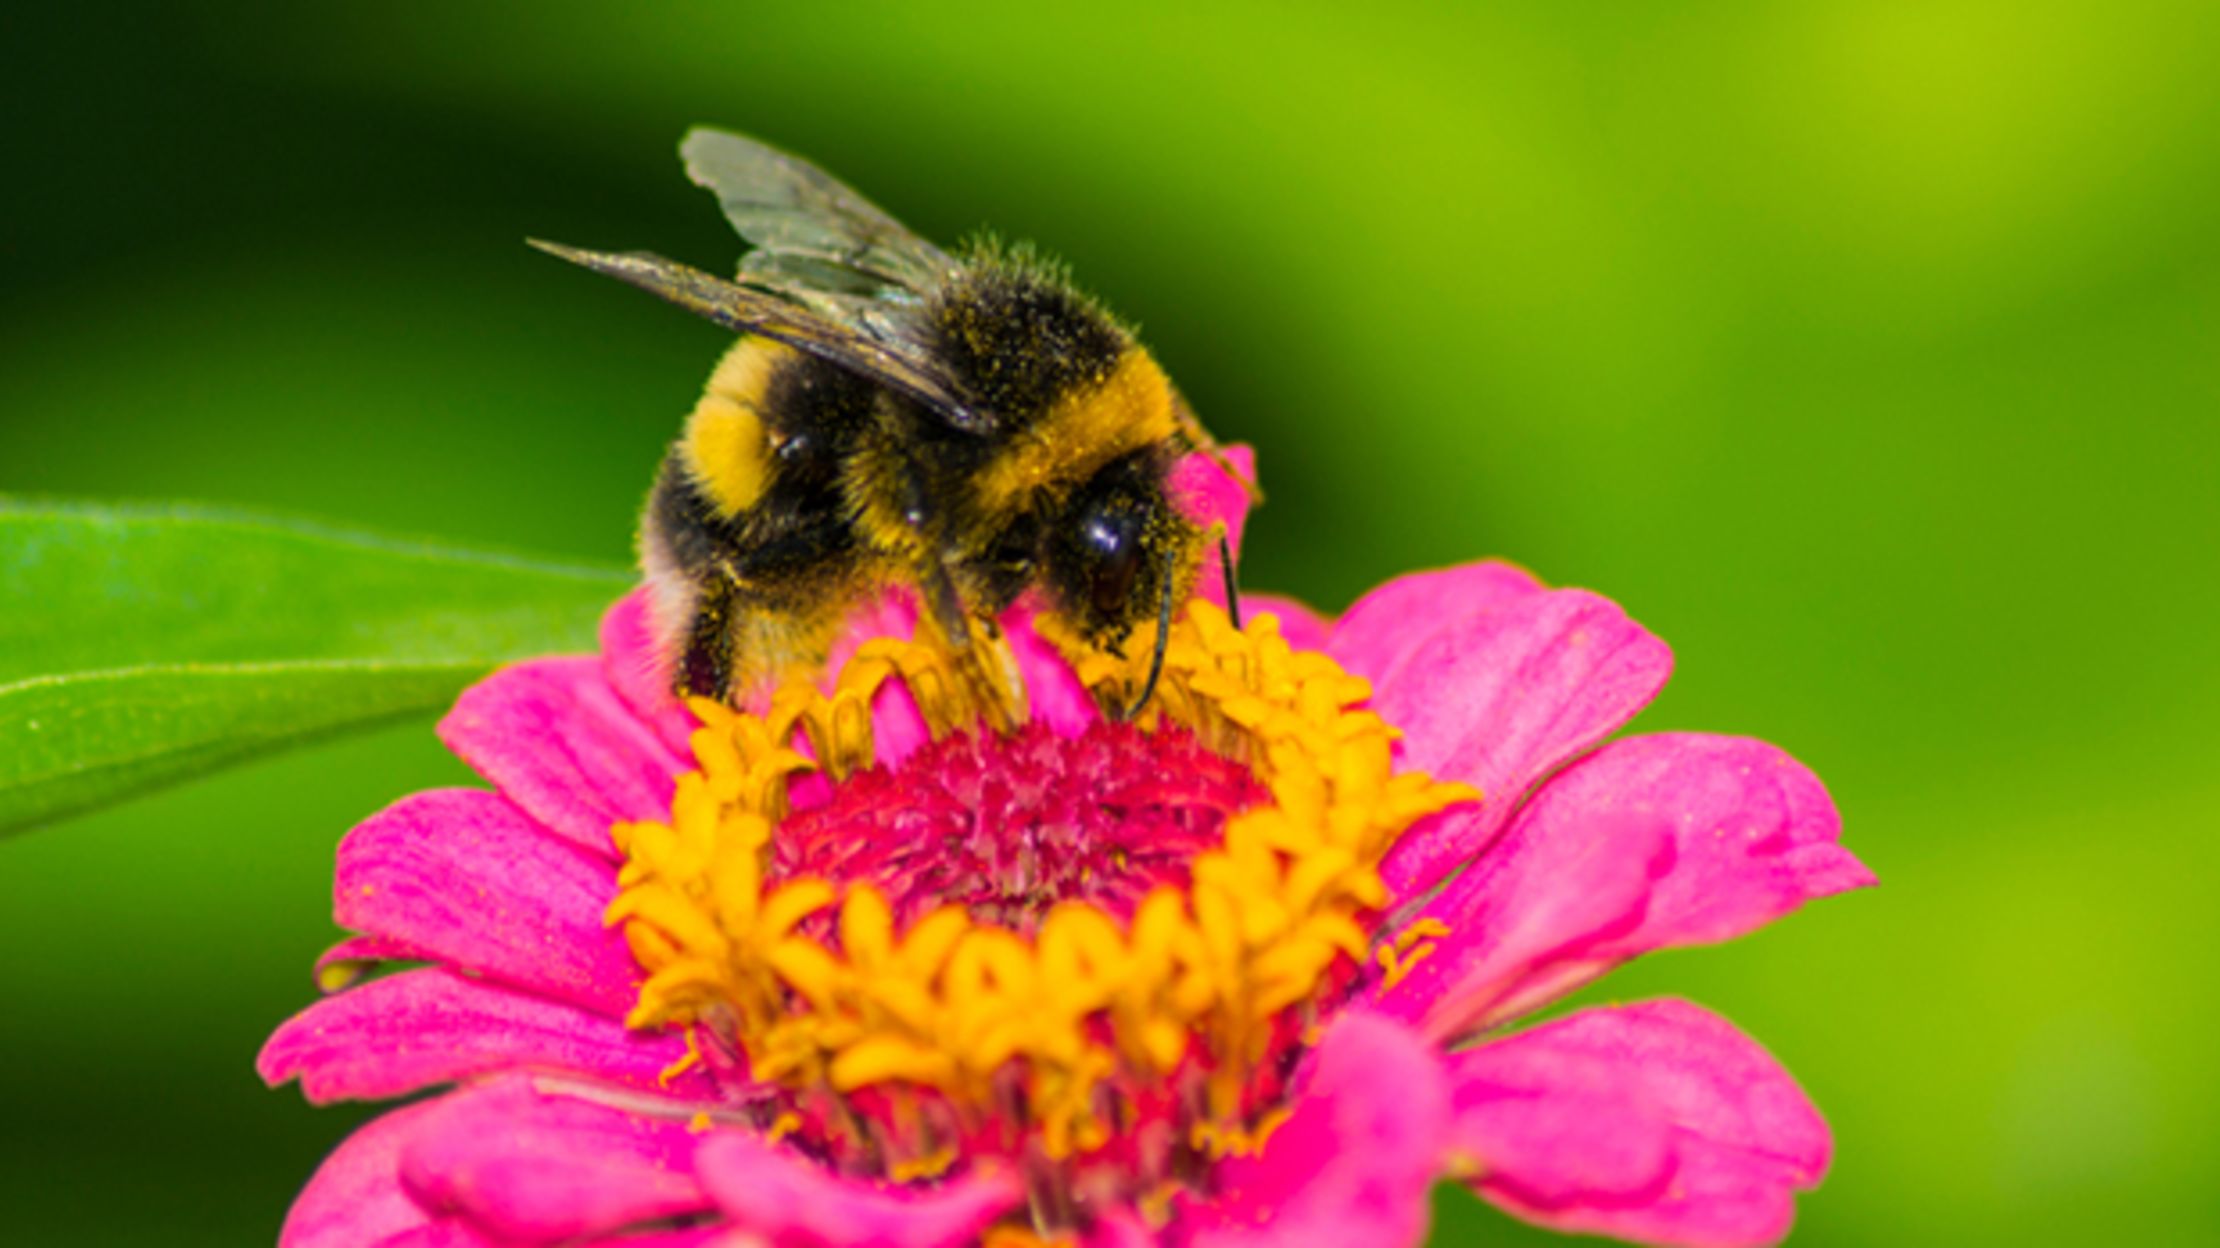 Download 15 Buzzworthy Facts About Bumblebees | Mental Floss